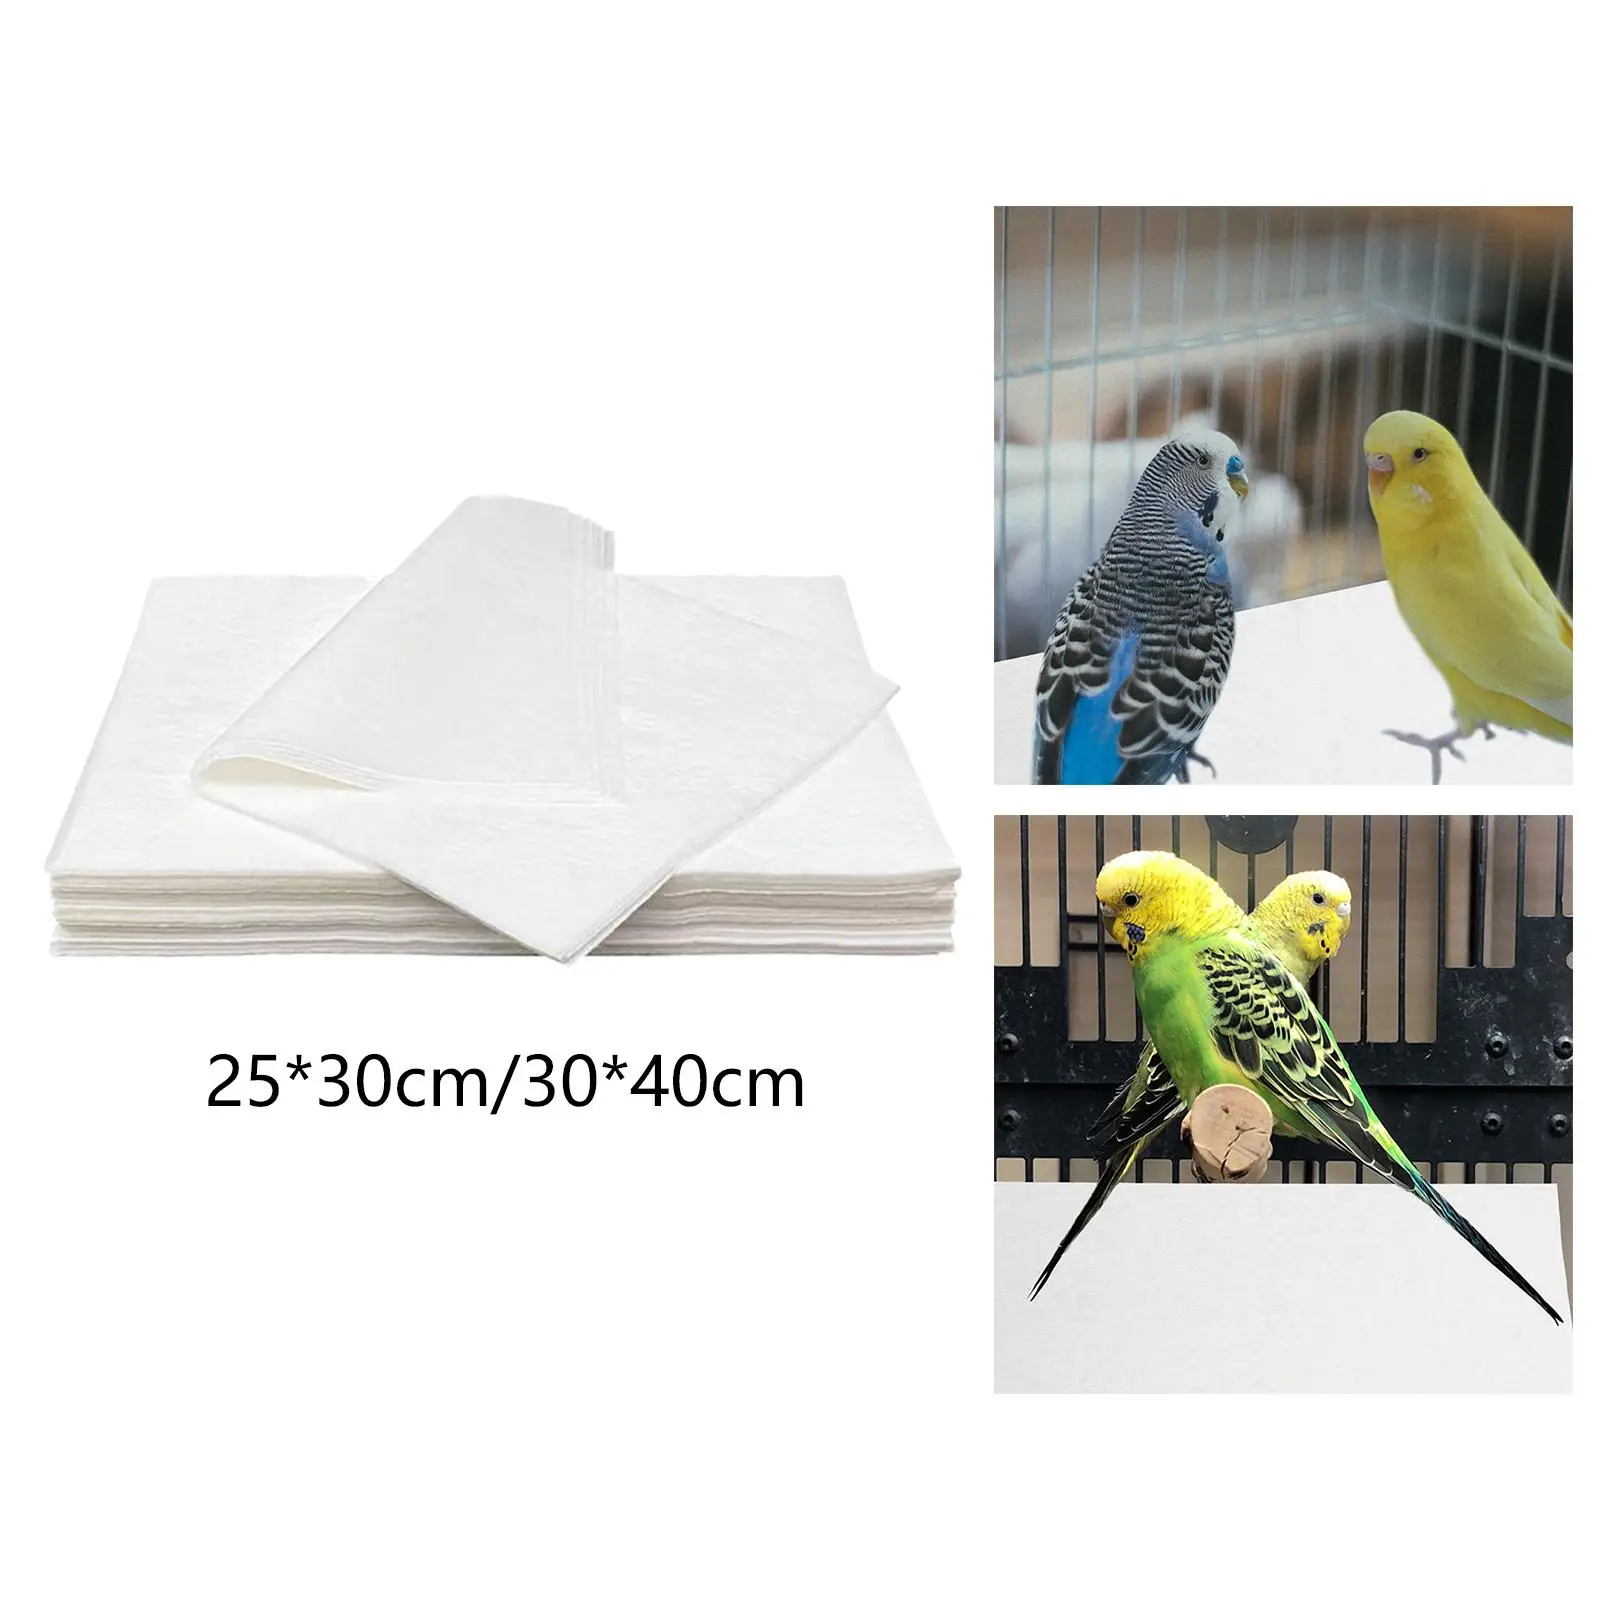 100x Pet Urine Pad Disposable Non Woven Fabric Dog Toilet Training Pads